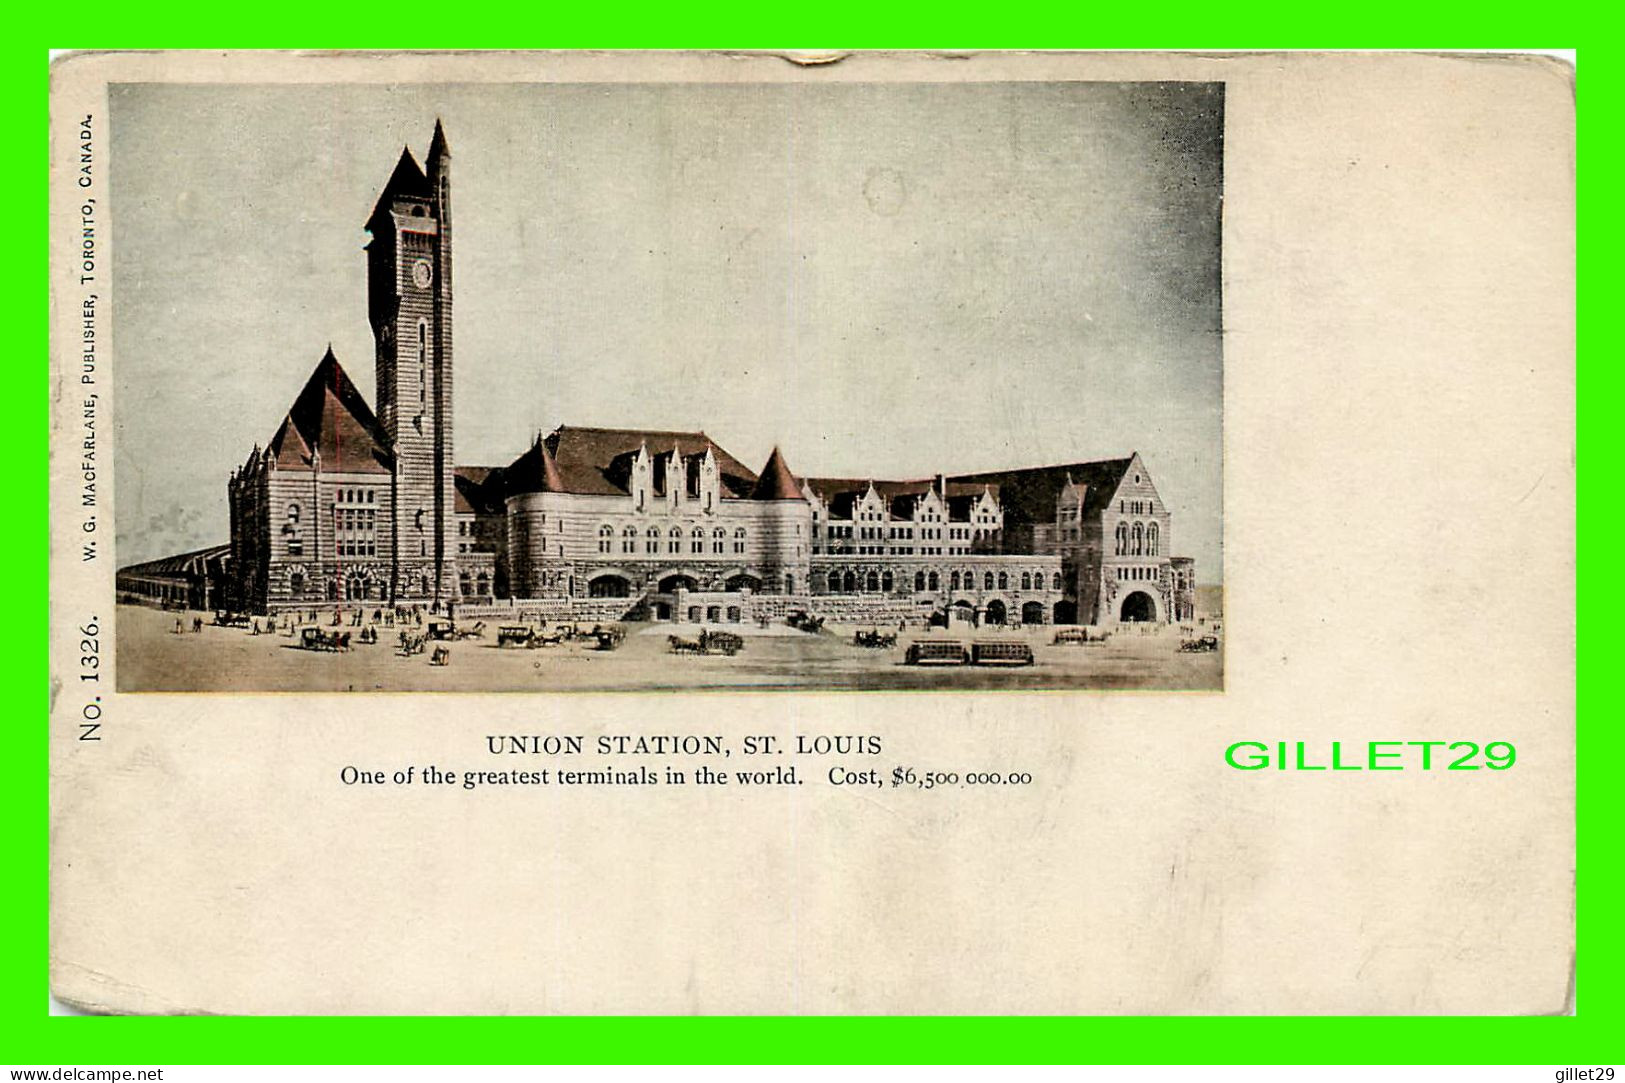 ST LOUIS, MO - UNION STATION, ONE OF THE GREATEST TERMINALS IN THE WORLD - W.G. MAC FARLANE PUBLISHER - - St Louis – Missouri